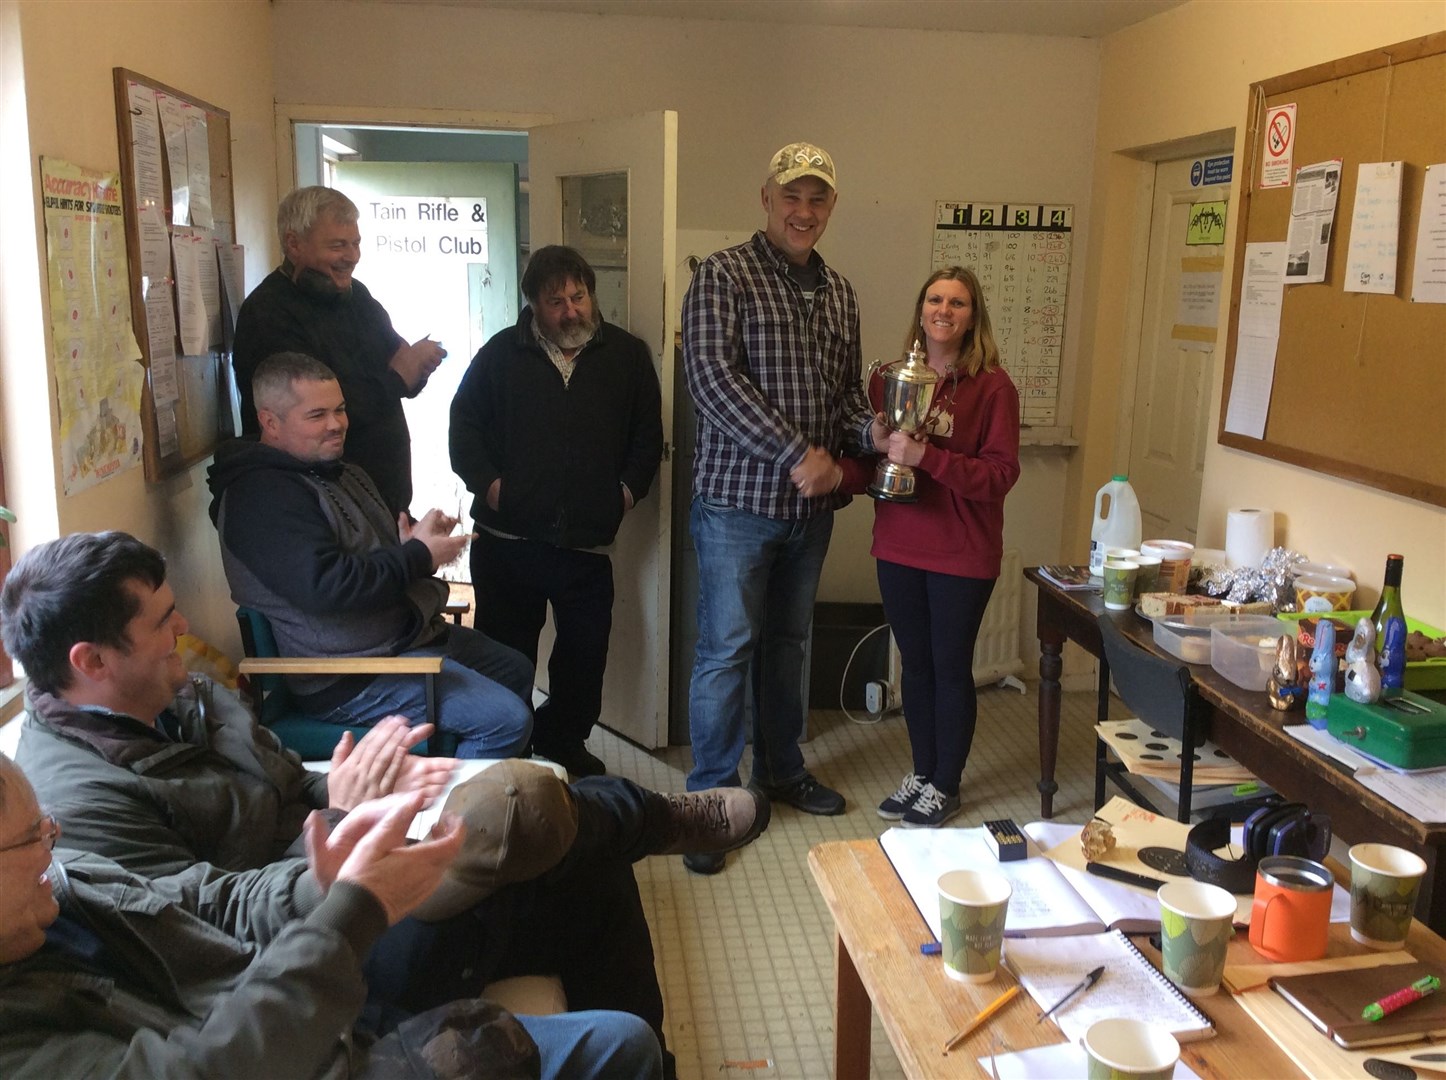 Tain Rifle and Pistol Club held its first event of the Year in April.